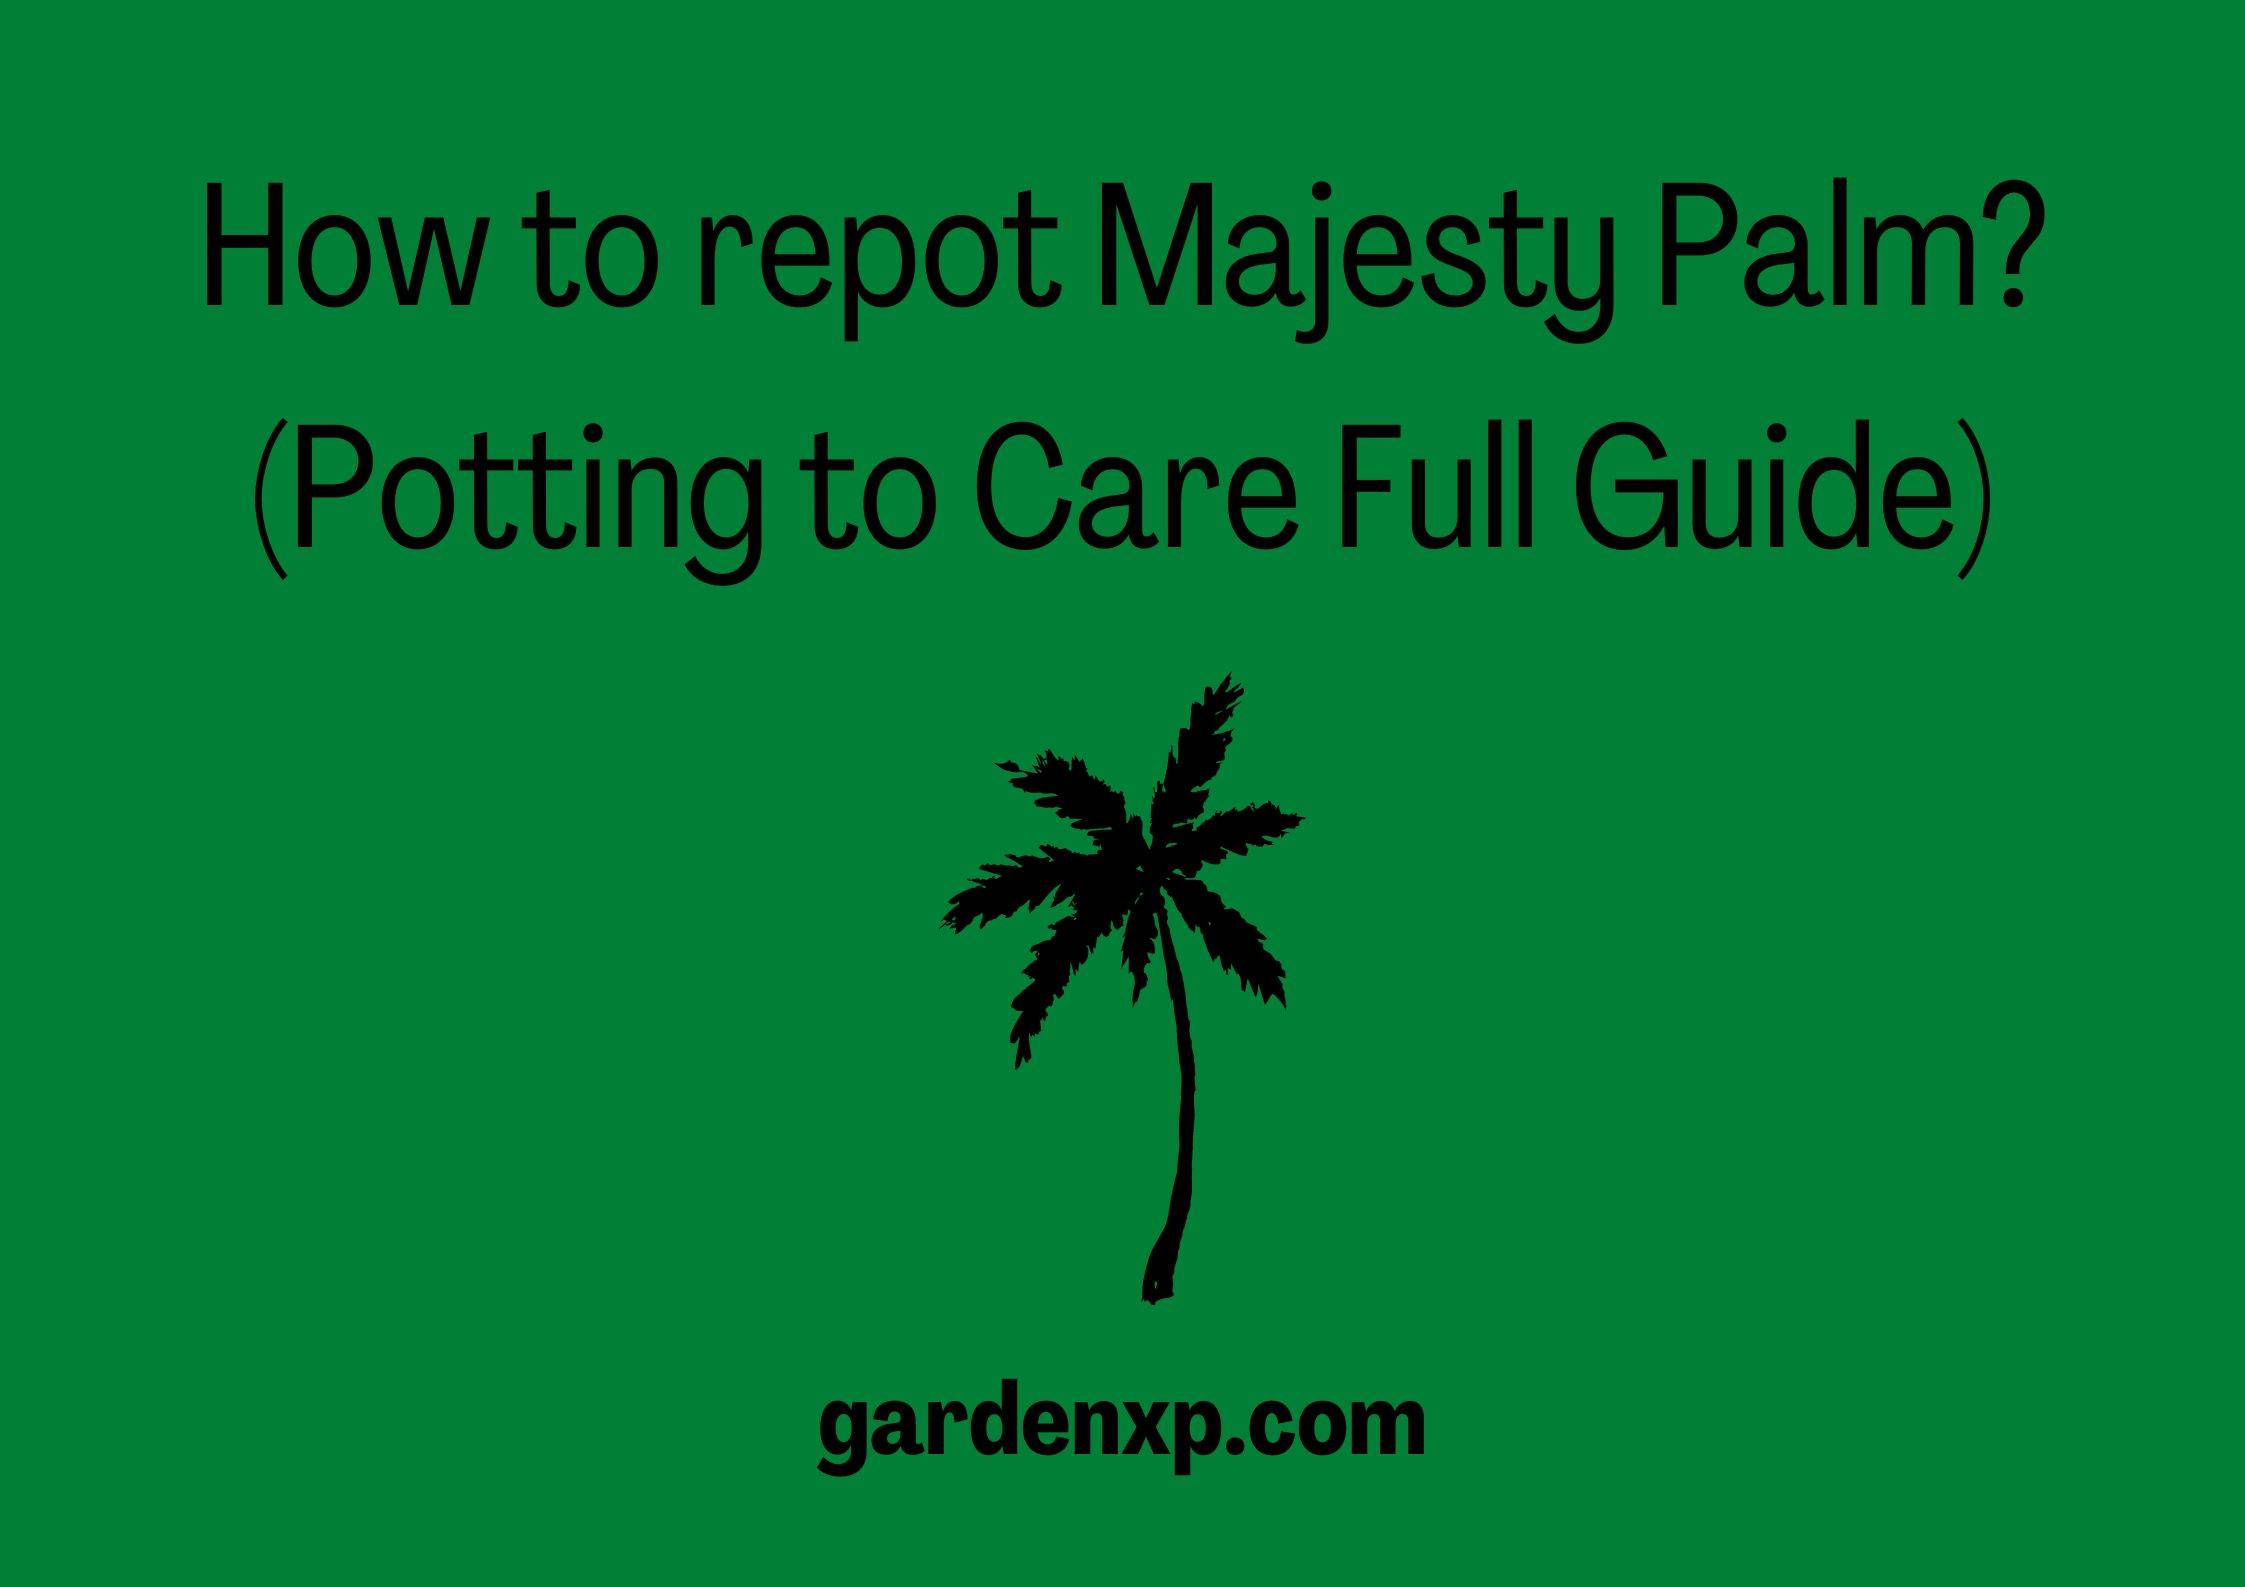 How to repot Majesty Palm? (Potting to Care Full Guide)